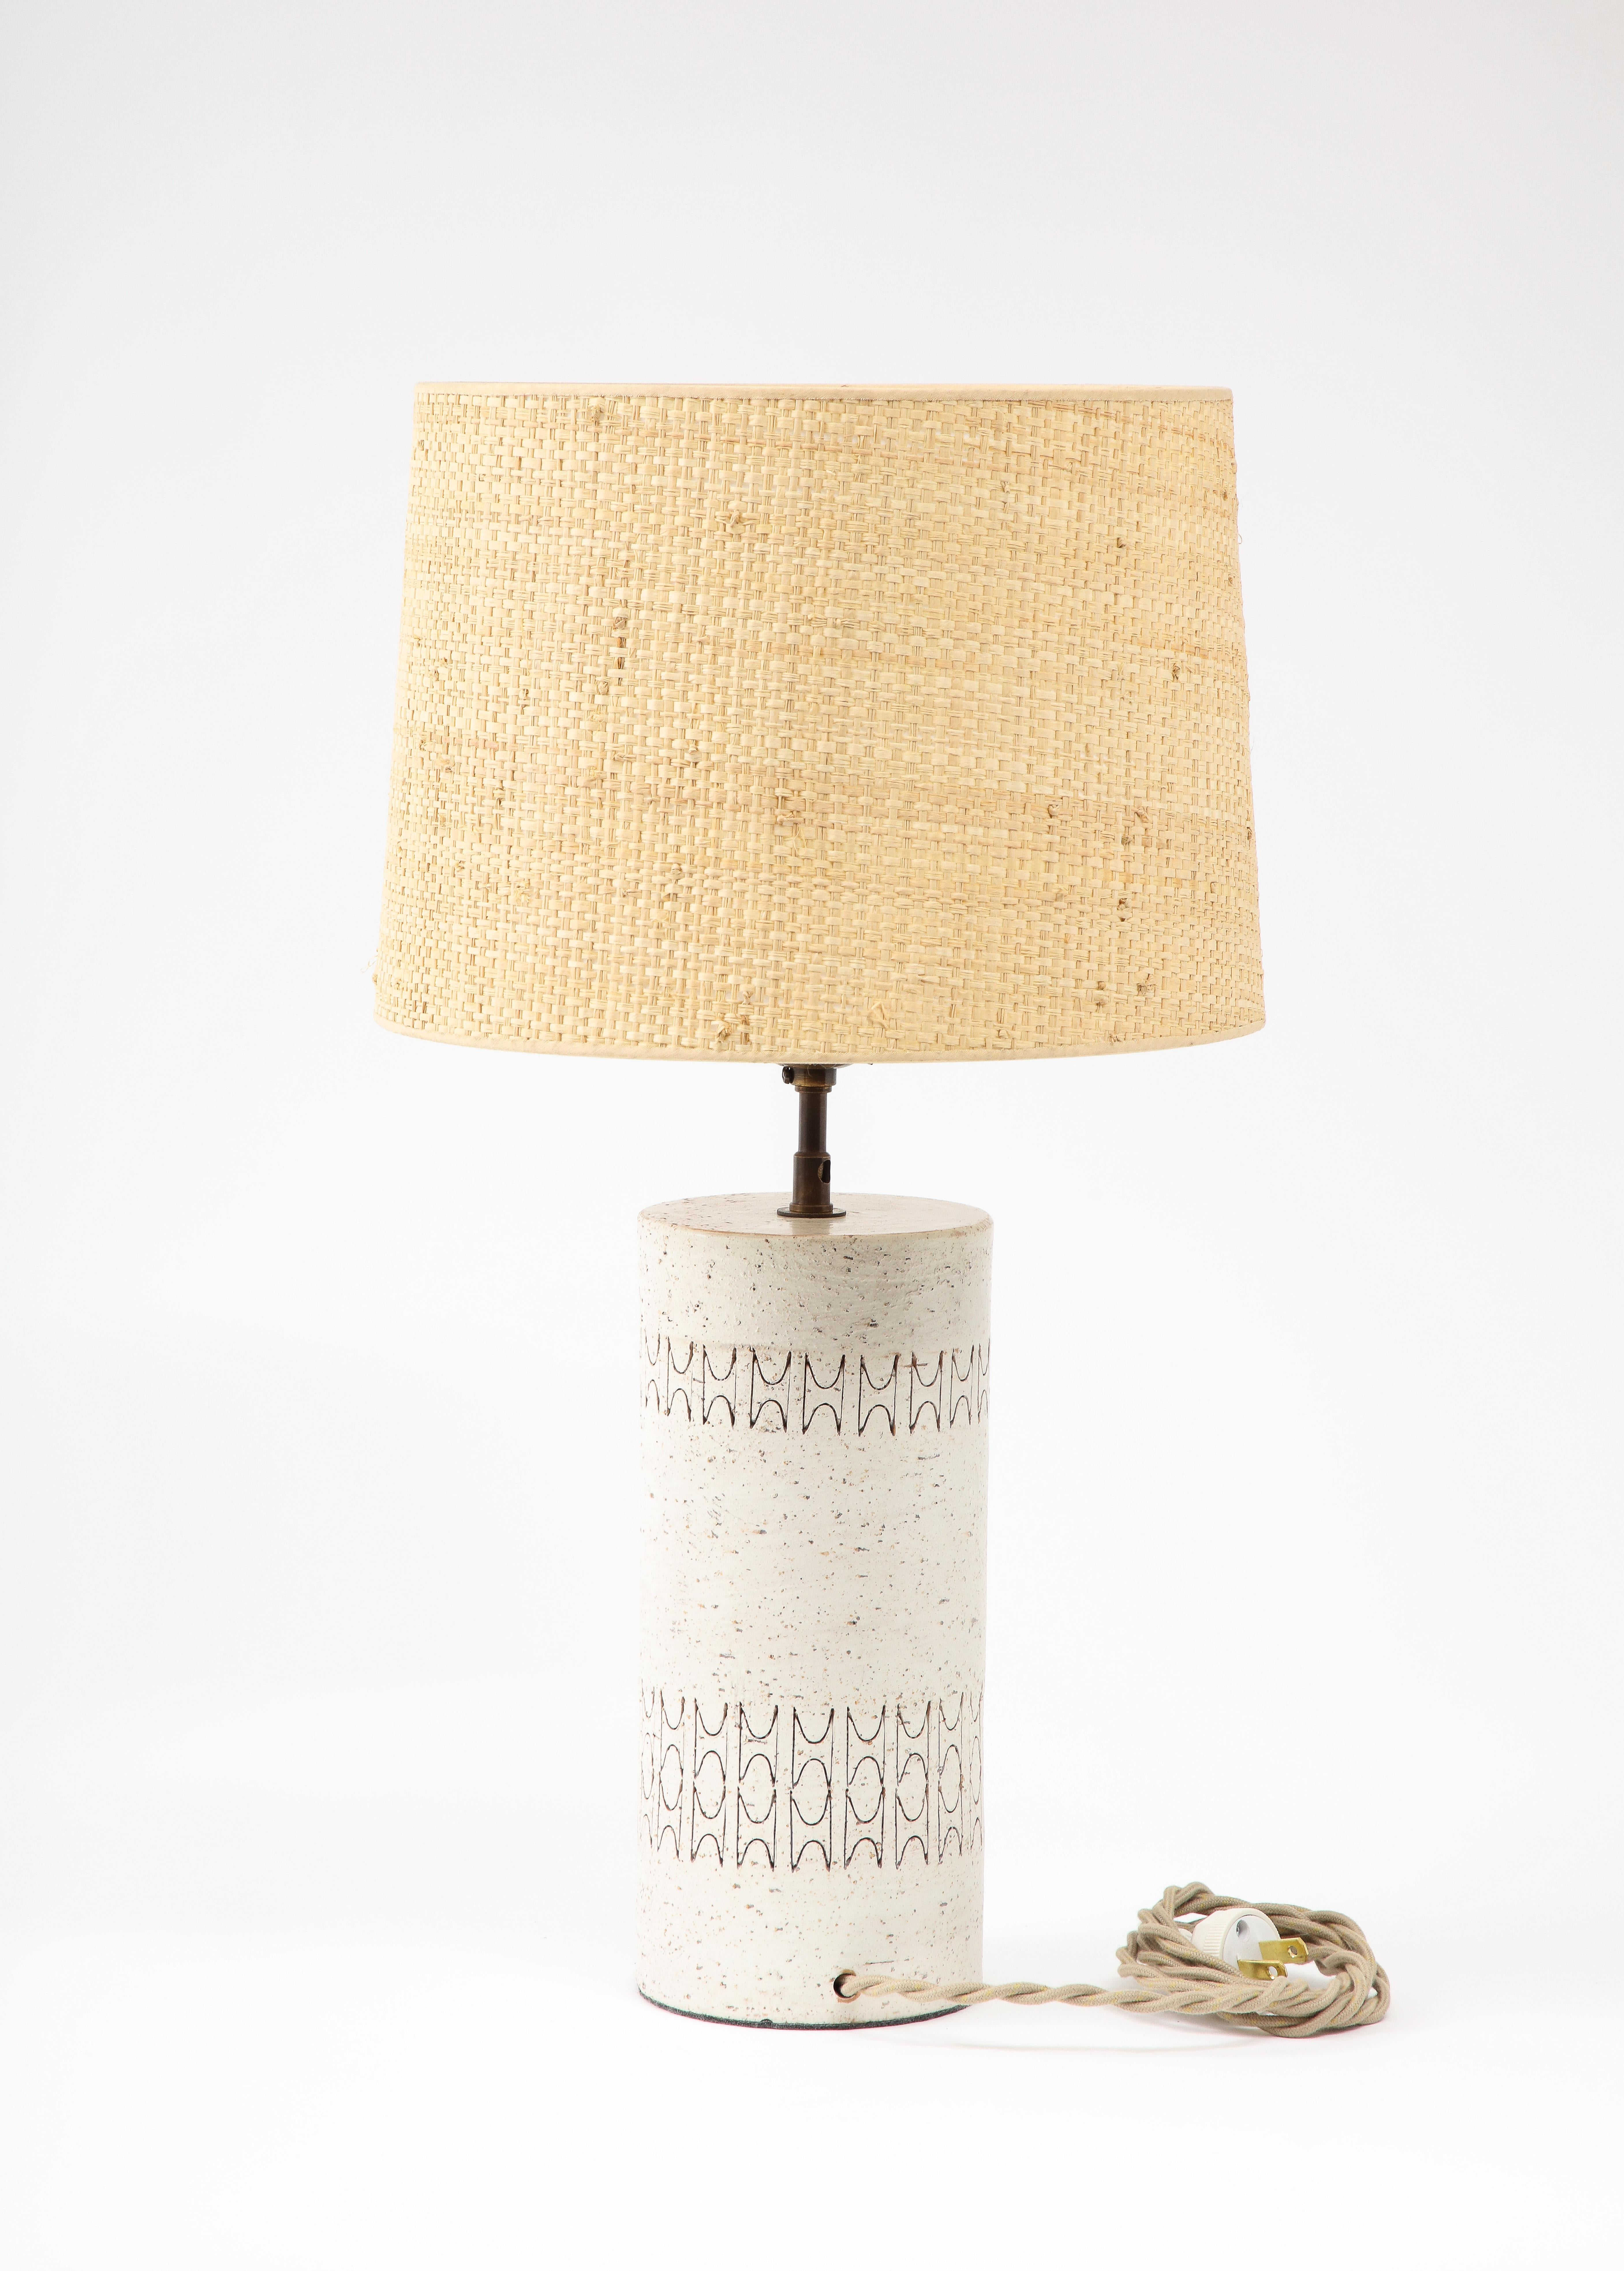 Incised ceramic table lamp by Bitossi, the lamp is rewired with a keyed socket and silk cord with a period-styled plug. No shade included.